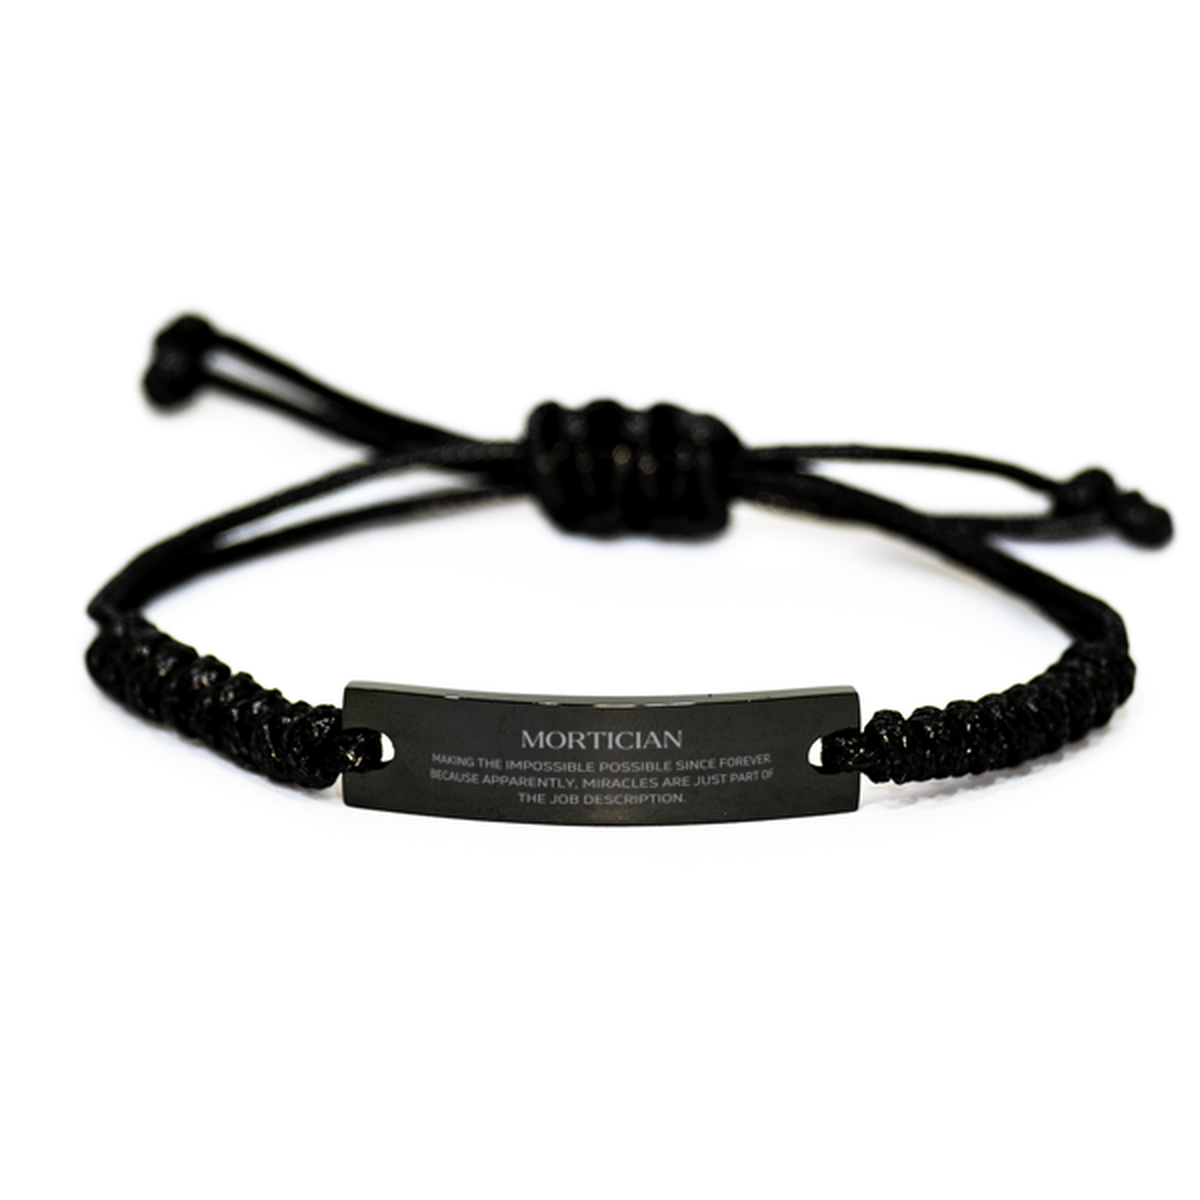 Funny Mortician Gifts, Miracles are just part of the job description, Inspirational Birthday Black Rope Bracelet For Mortician, Men, Women, Coworkers, Friends, Boss